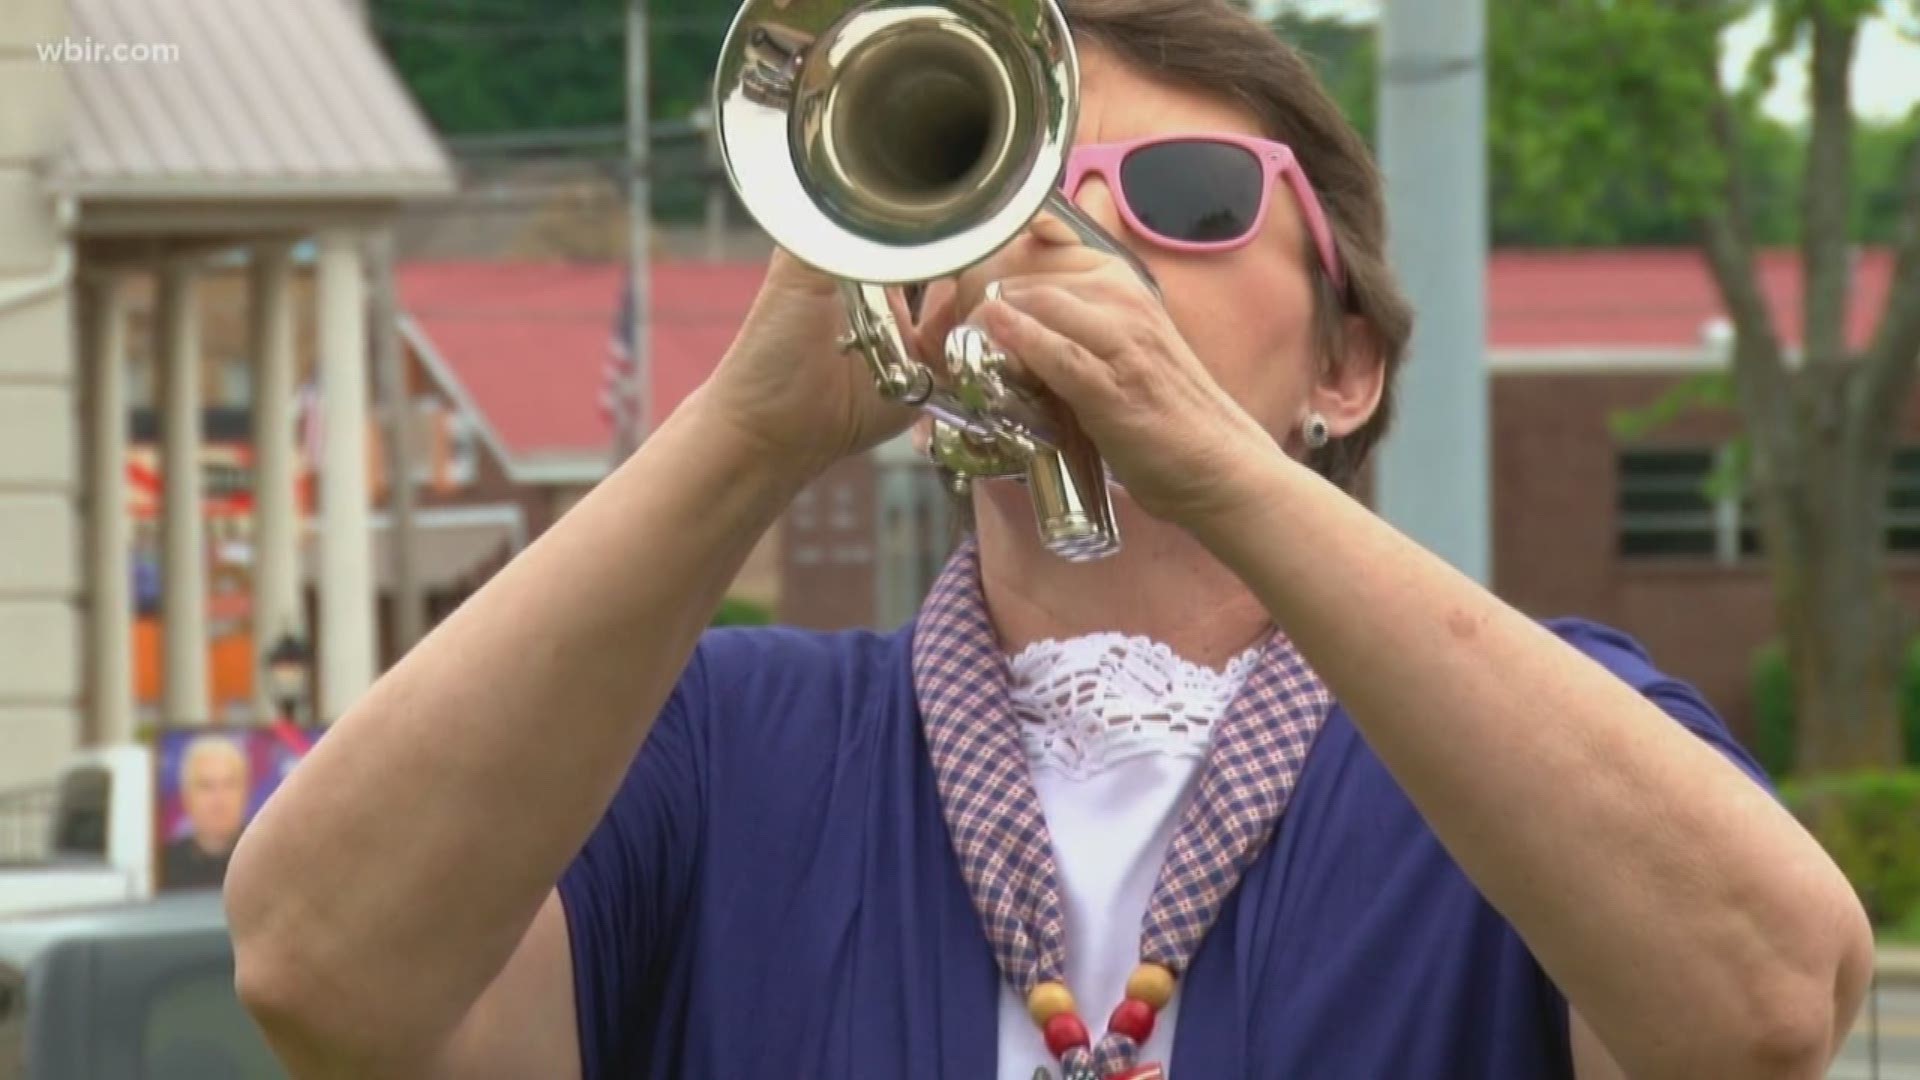 And finally, honoring the fallen this memorial day is one woman who has played taps for veterans for 40 years.